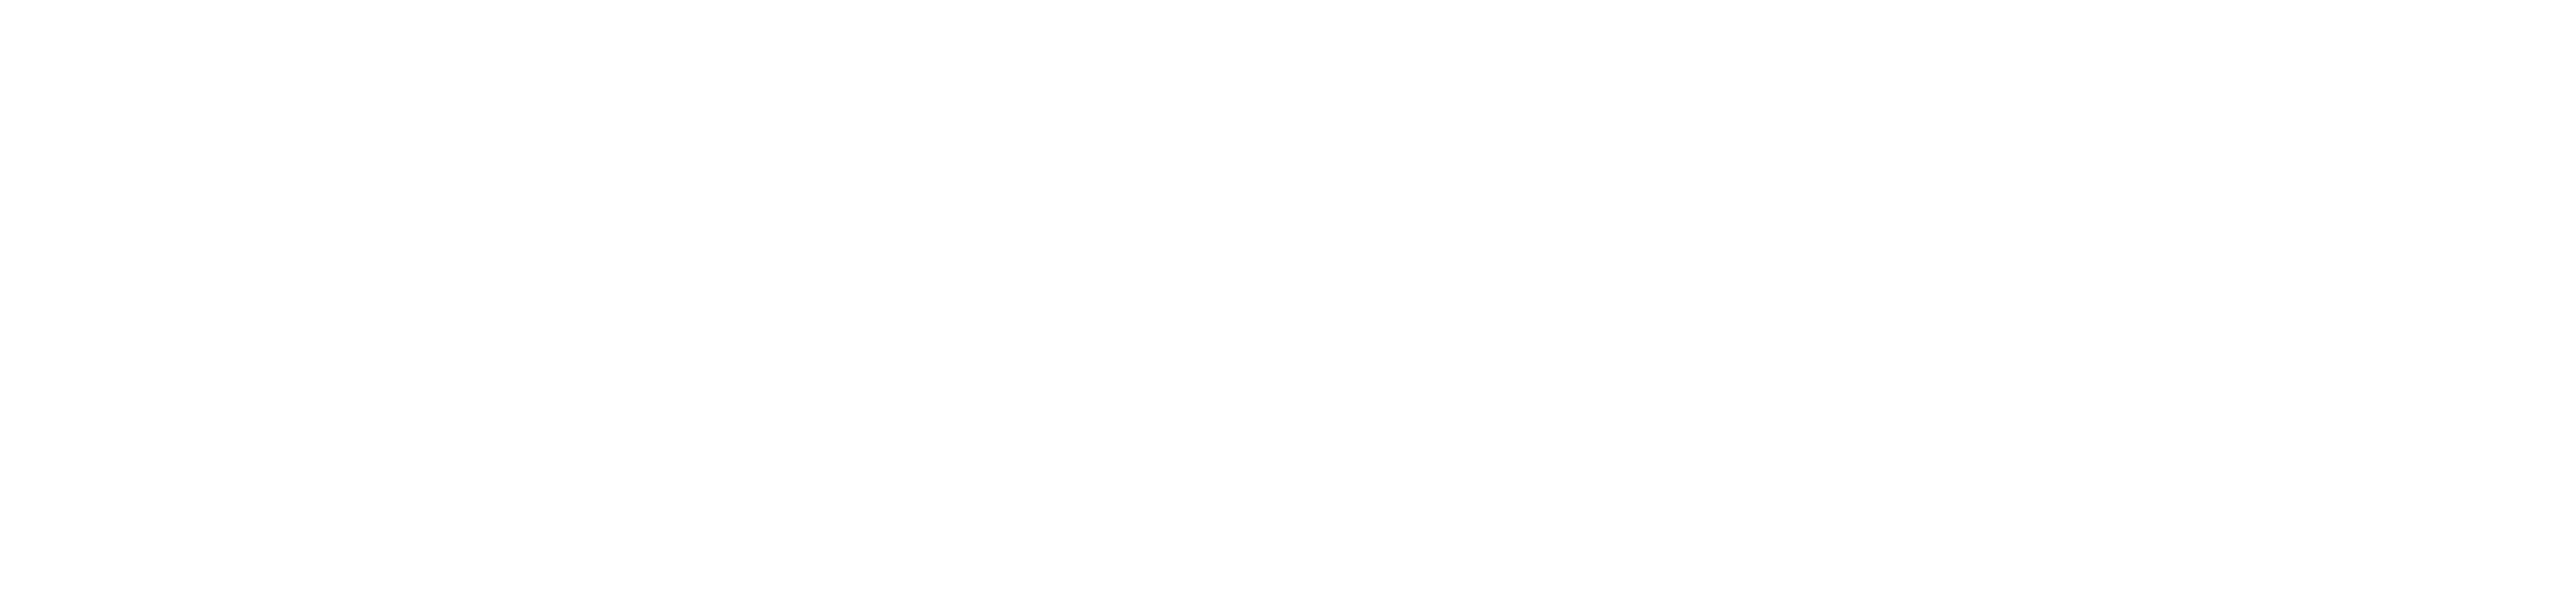 'Twas the Fight Before Christmas logo